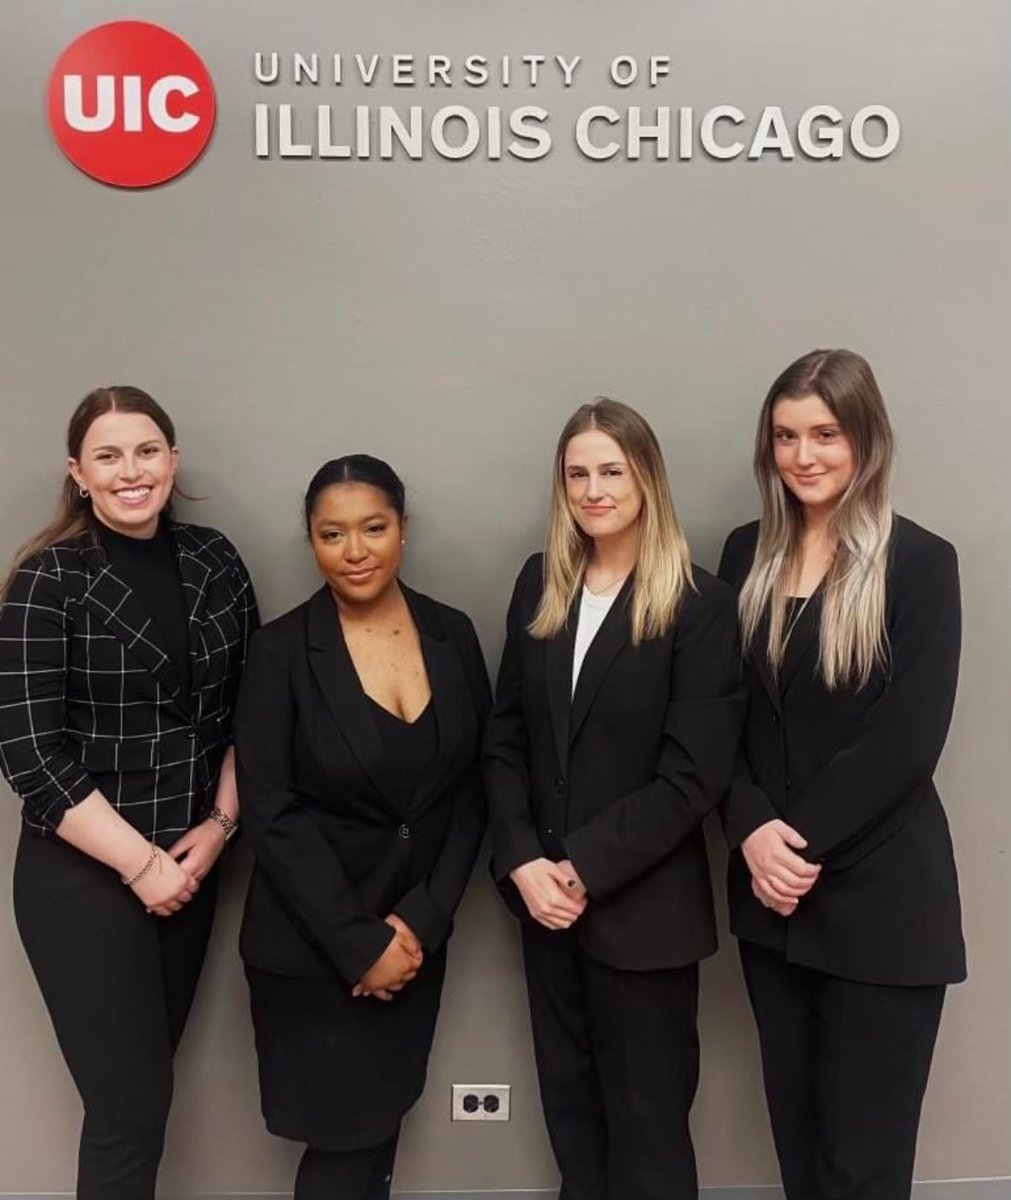 Congratulations to UIC Law students Andrea Alcantar, Oliva Dolan, Allie Magee, and Rebecca Westrom who were trial team finalists at the American Association for Justice (AAJ) Student Trial Advocacy Regional Competition! @JusticeDotOrg We are so #uiclawproud of you! ❤️⚖️💙